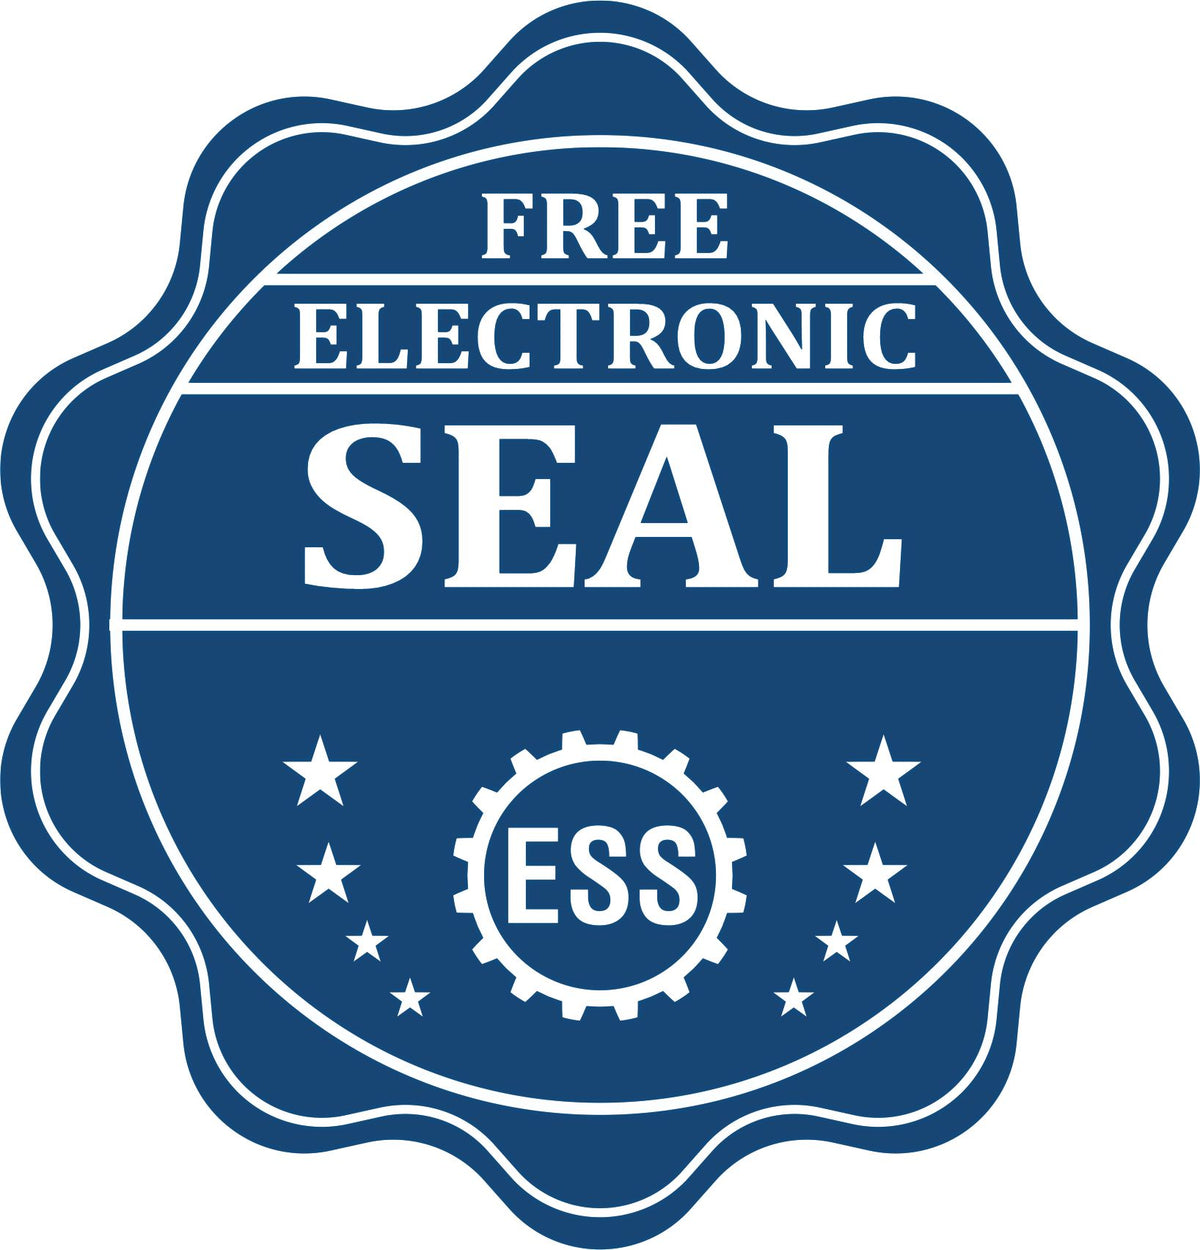 A badge showing a free electronic seal for the State of Texas Extended Long Reach Geologist Seal with stars and the ESS gear on the emblem.